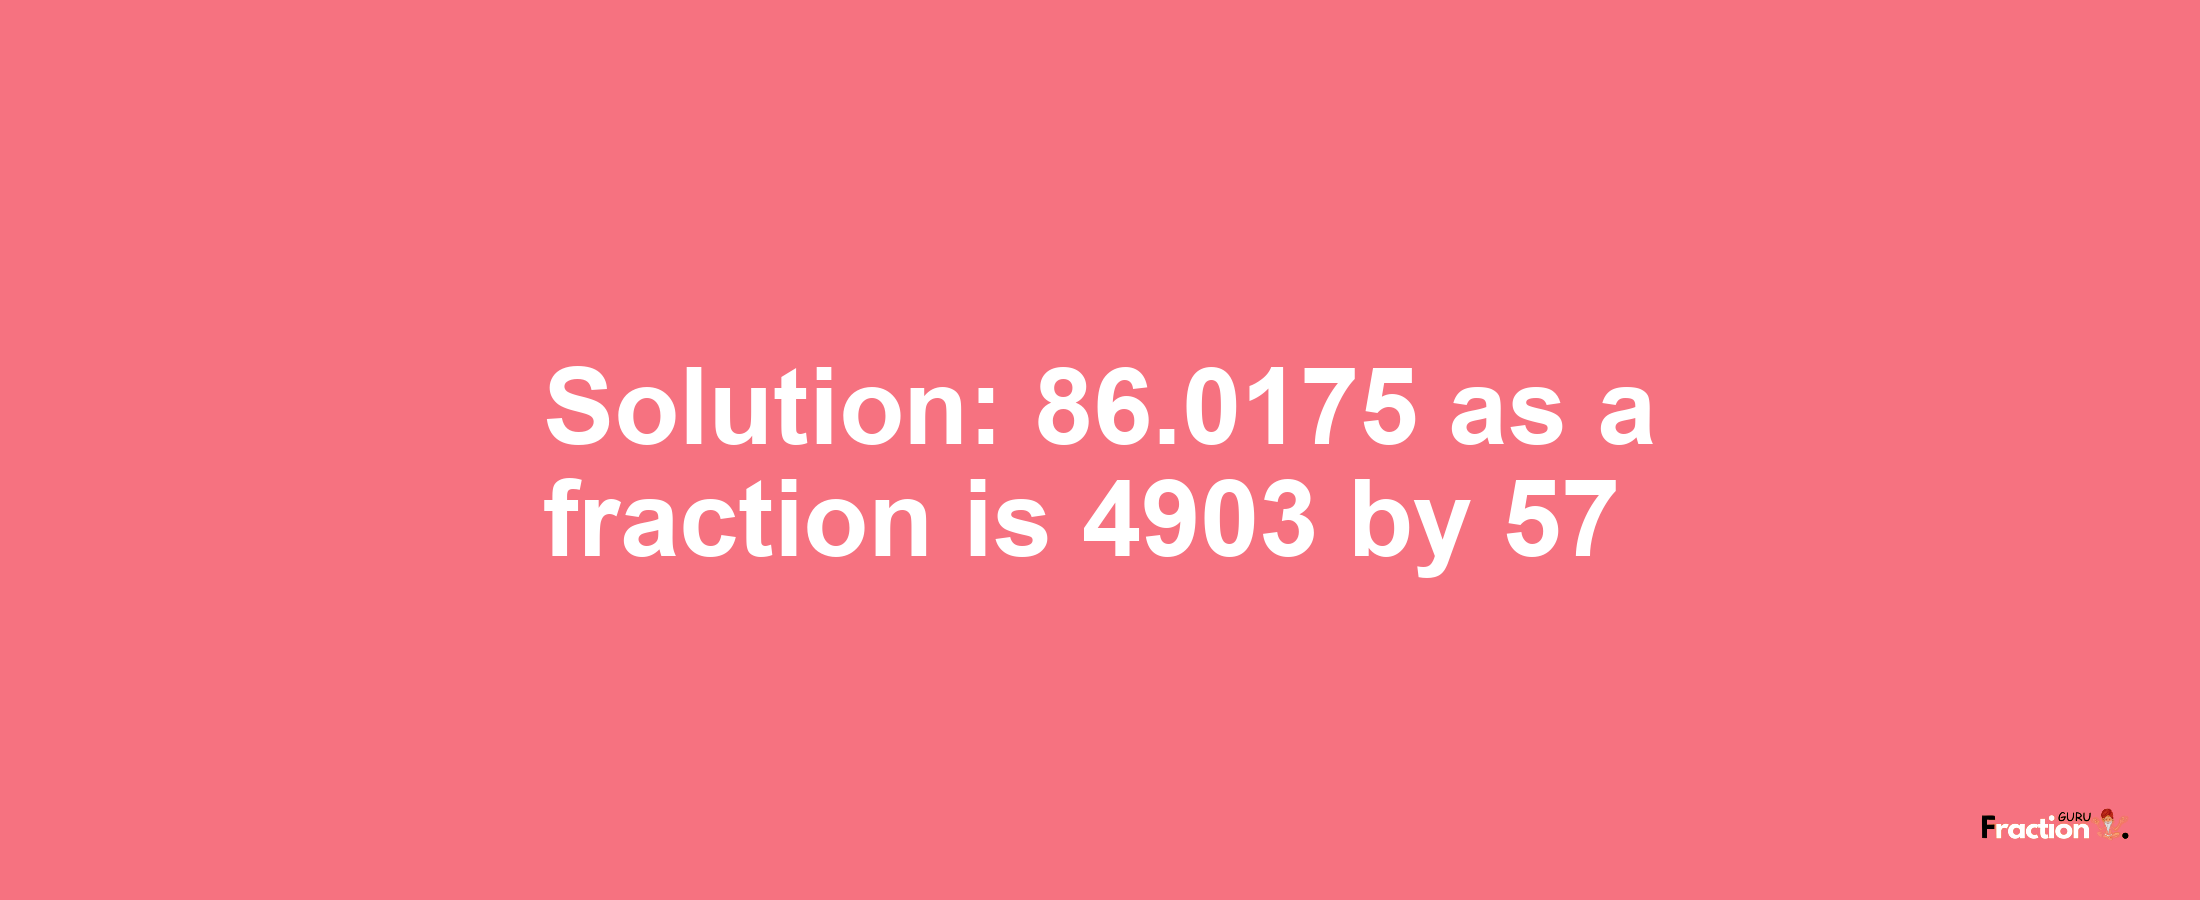 Solution:86.0175 as a fraction is 4903/57